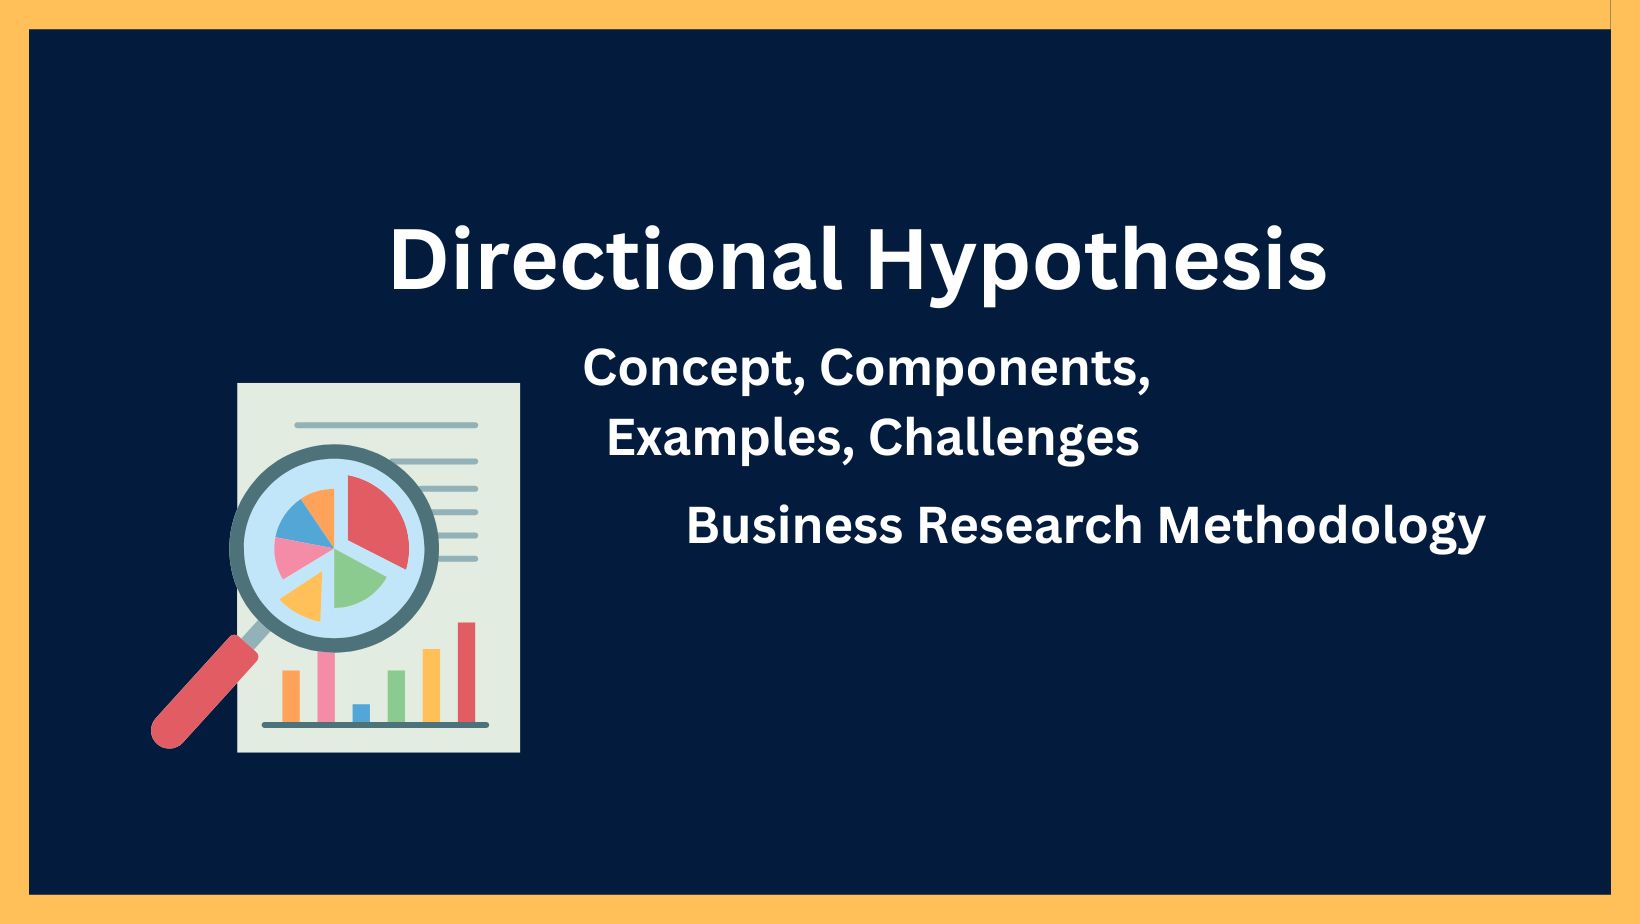 directional hypothesis in research meaning